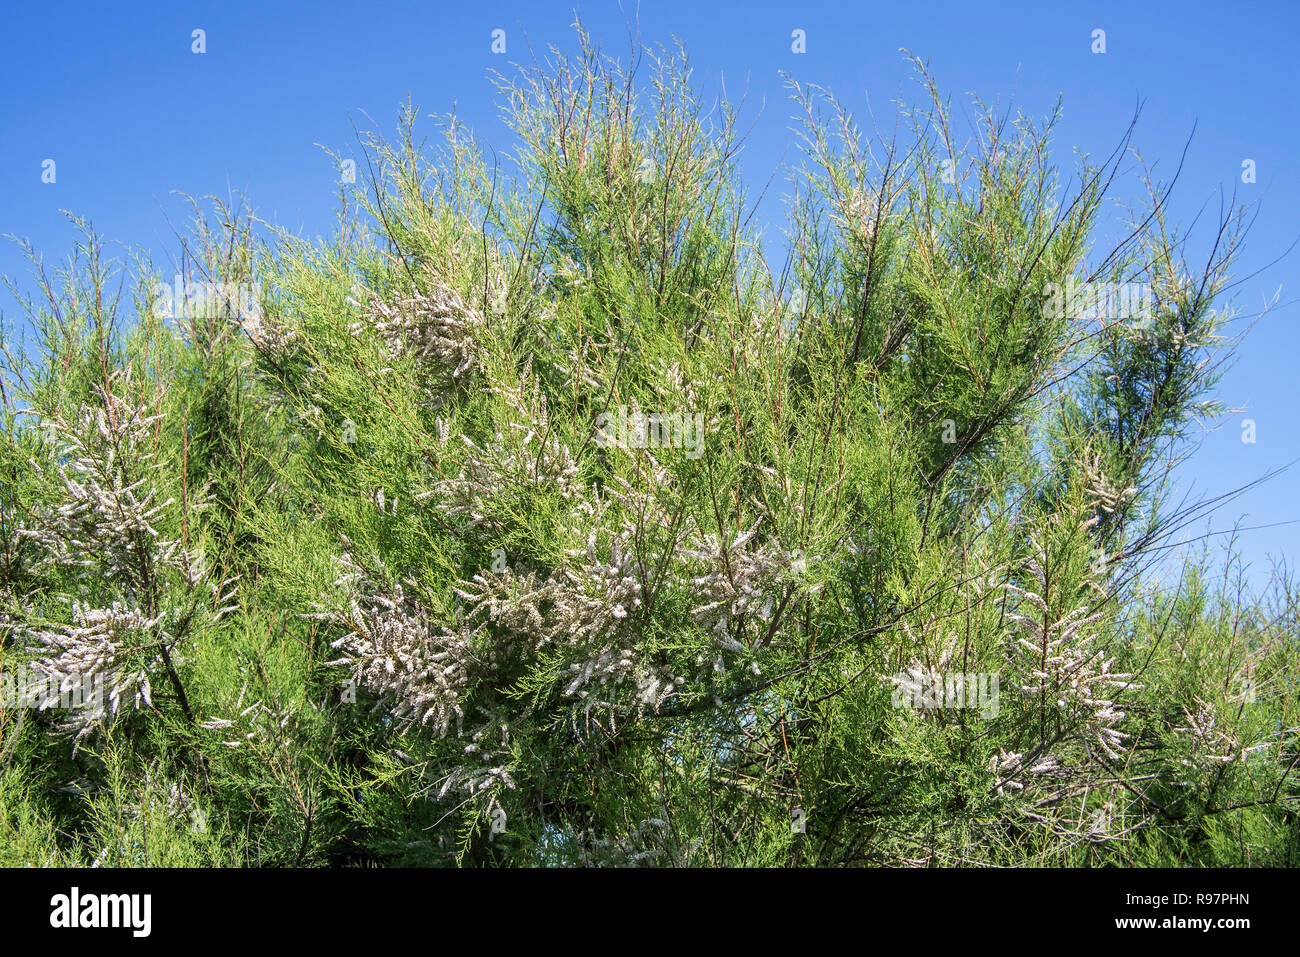 African tamarisk (Tamarix africana) herbaceous, twiggy shrub and invasive introduced species growing along the coast, France Stock Photo